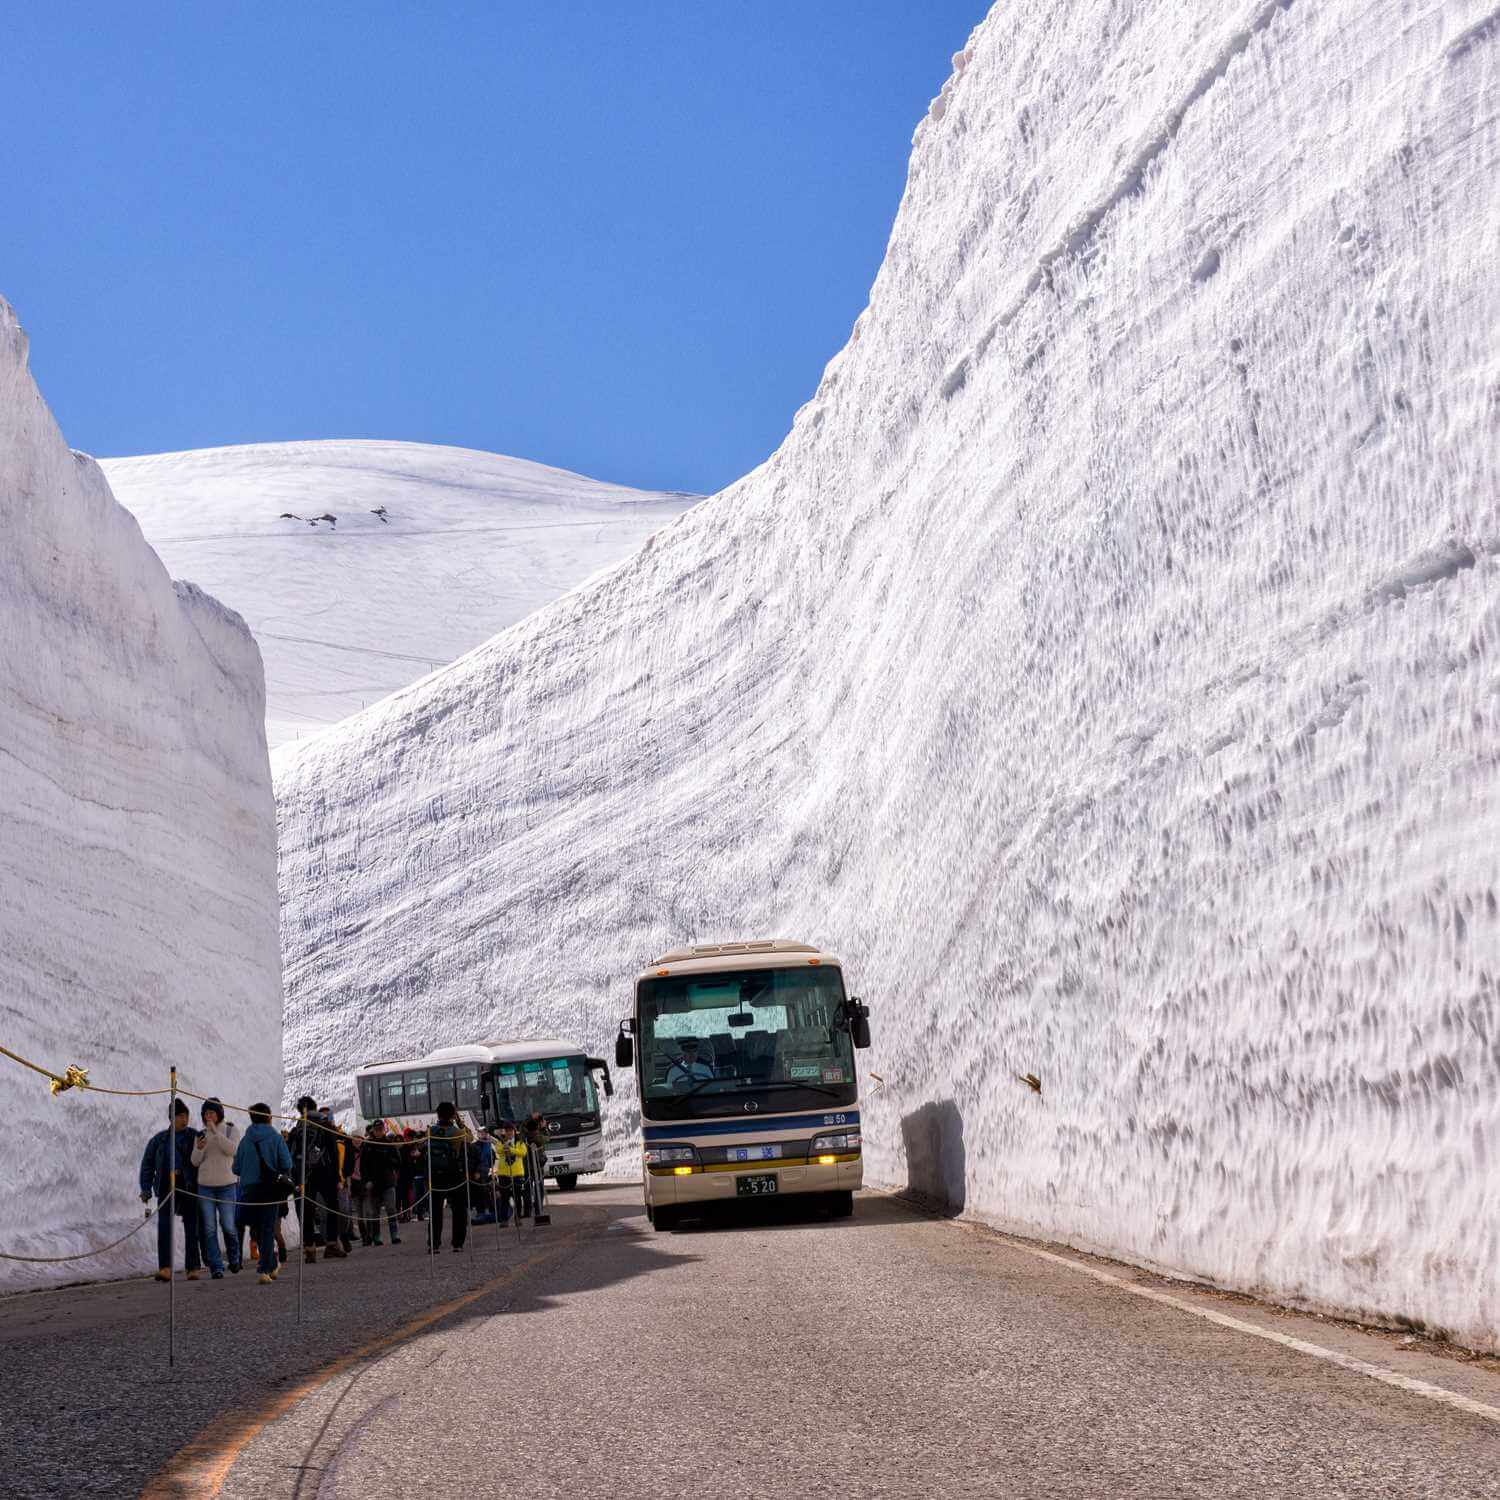 In the Tateyama mountain range in Toyama Prefecture, roads that have been closed by snow for the winter reopen in late April = Shutterstock